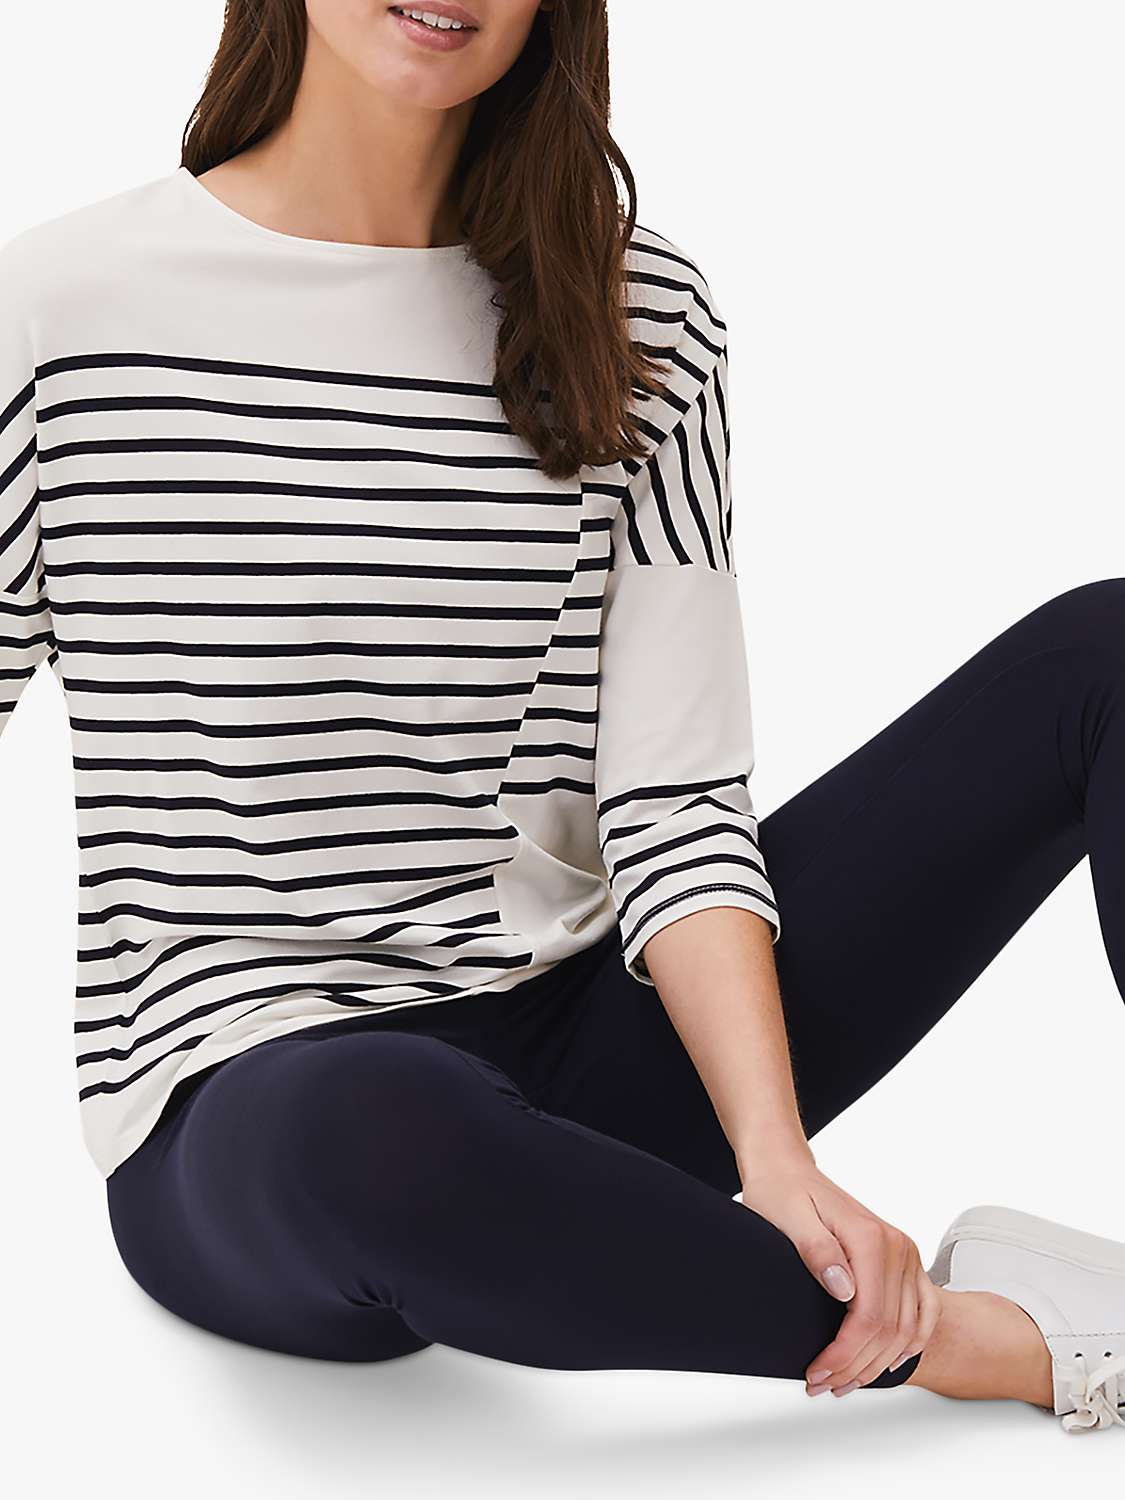 Buy Phase Eight Lizzie Soft Jersey Leggings, Navy Online at johnlewis.com